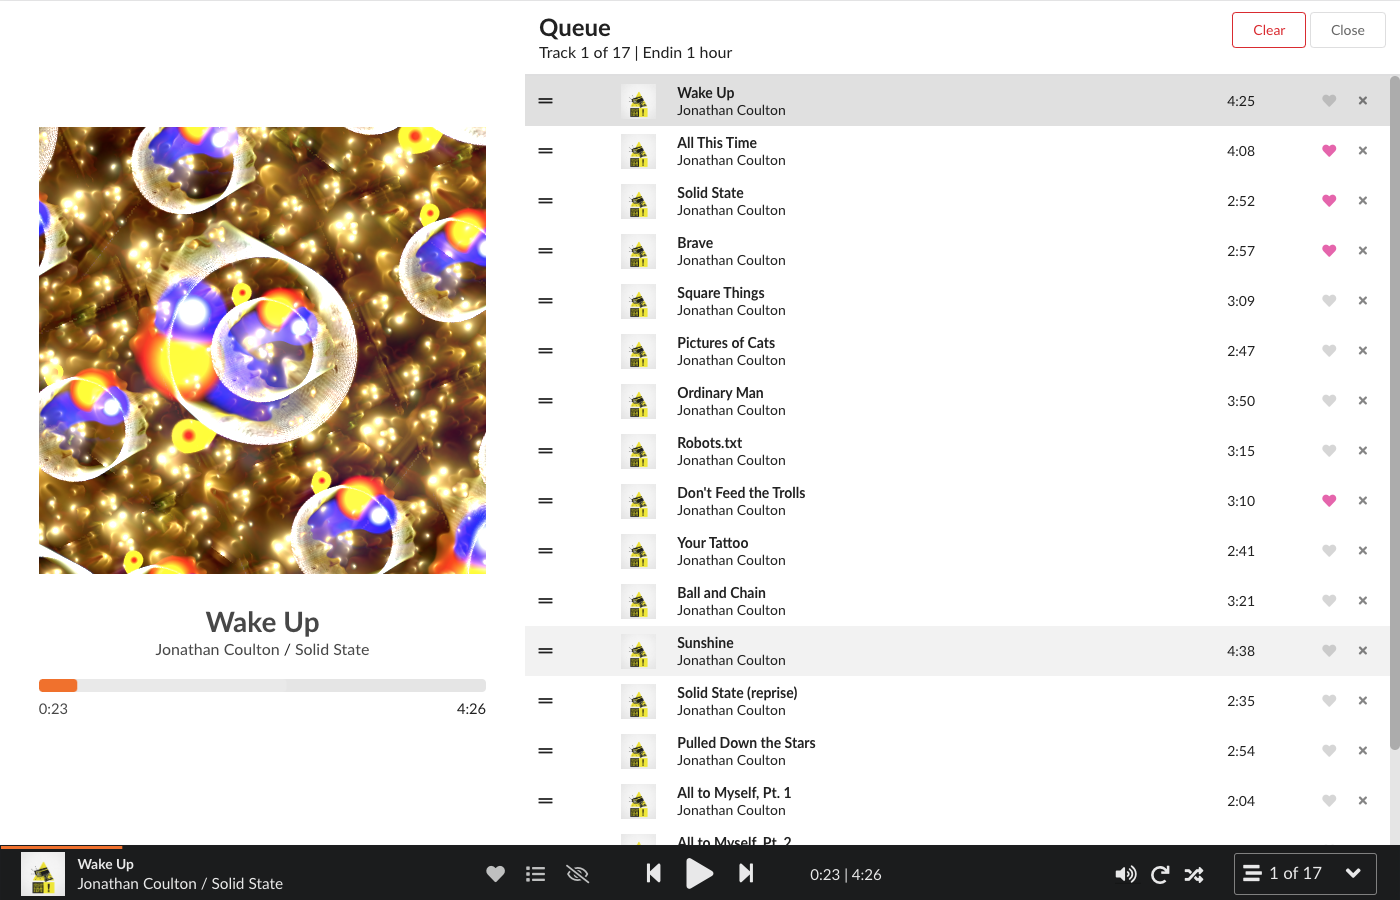 A screenshot of the music visualizer